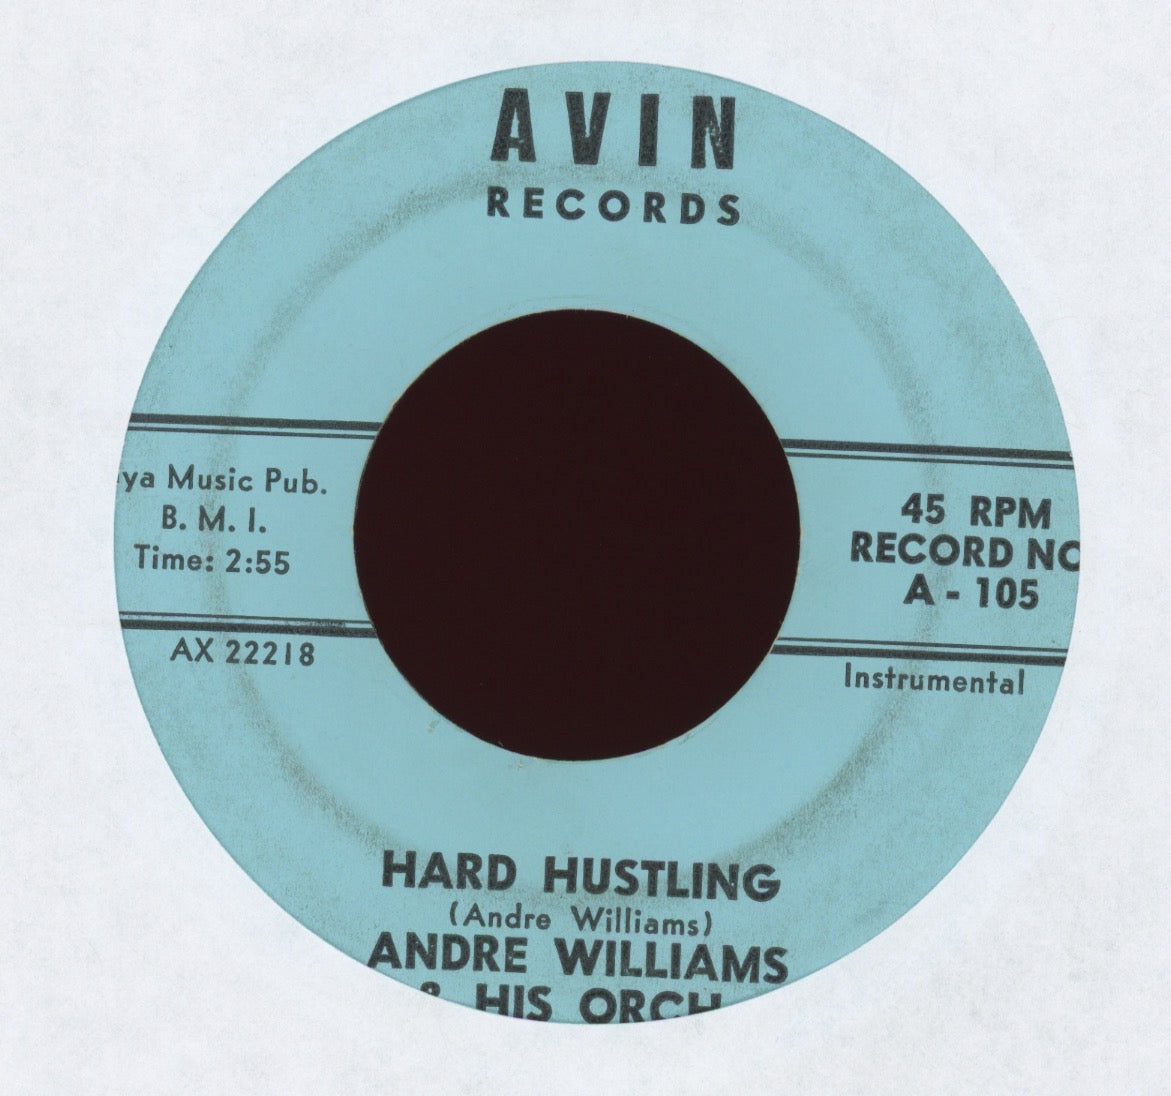 Andre Williams & His Orchestra - Hard Hustling on Avin Funk 45